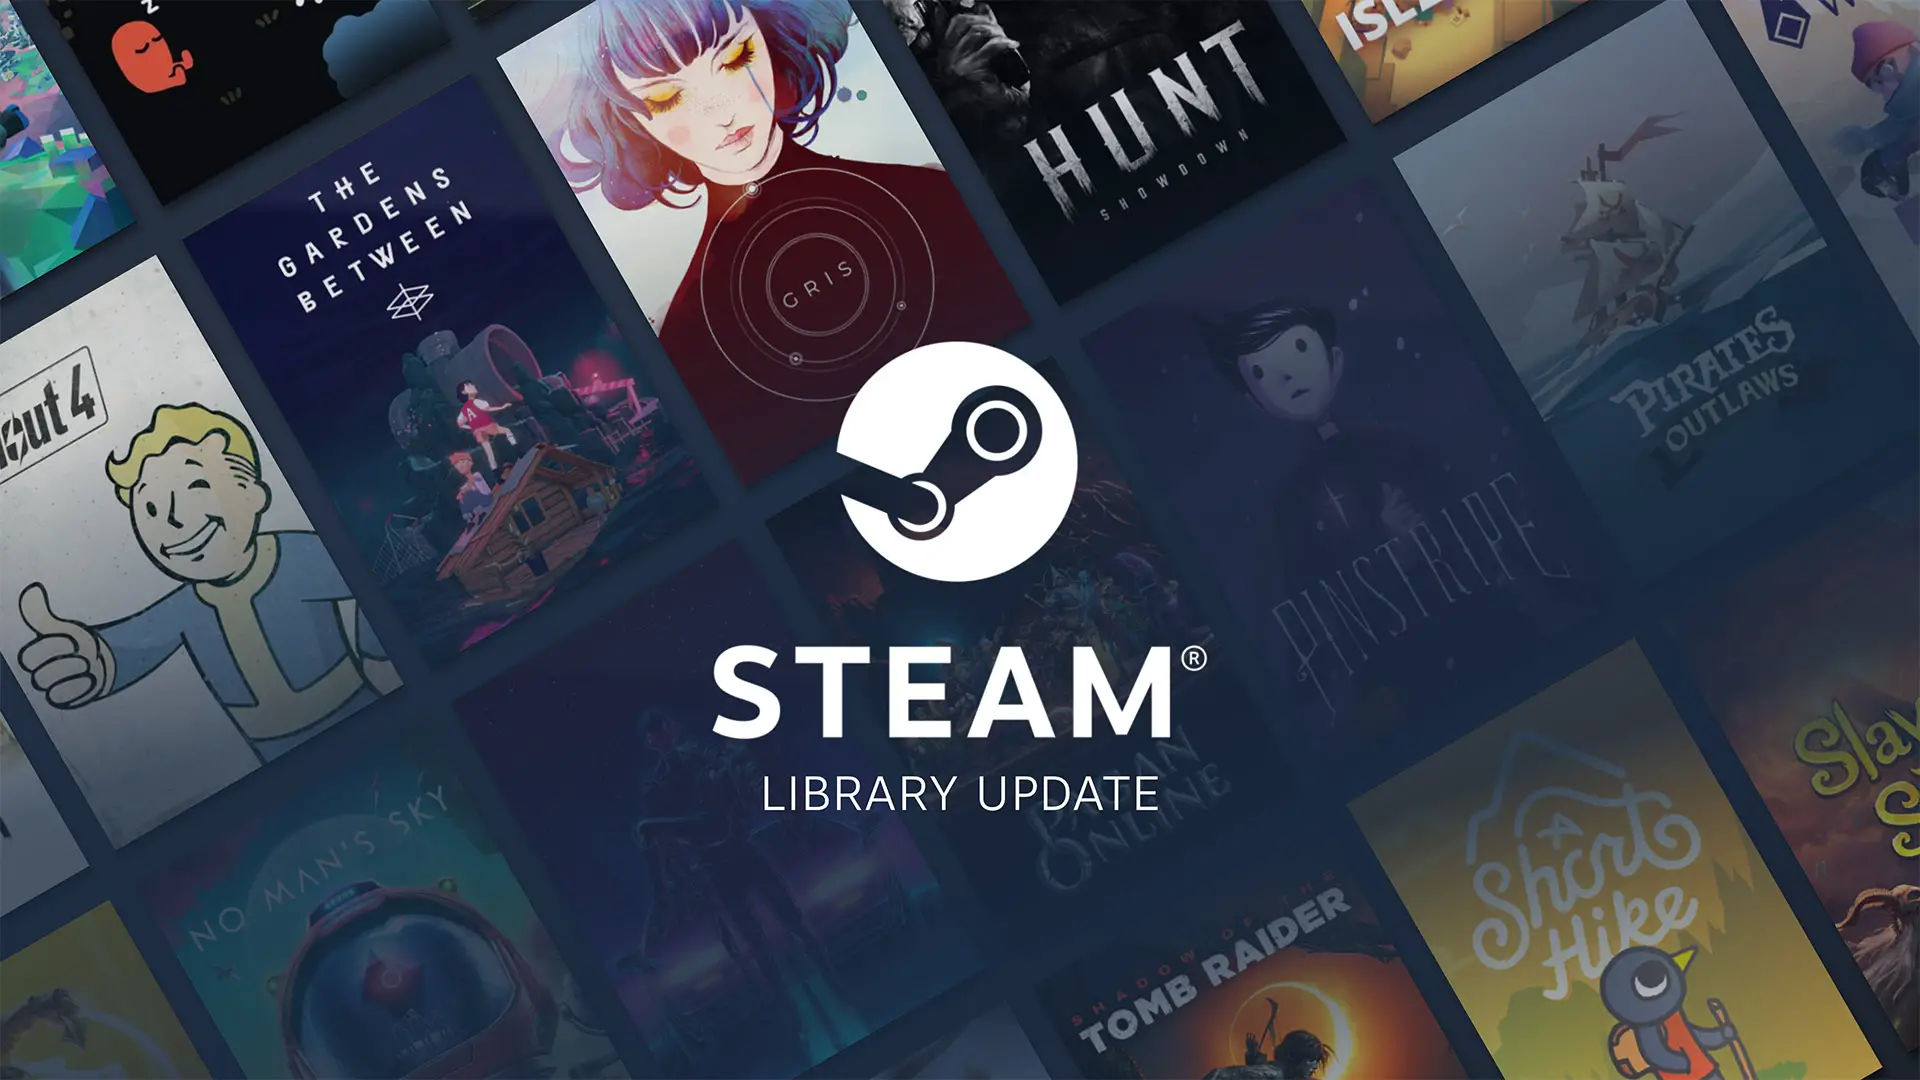 How to remove a game from steam library?